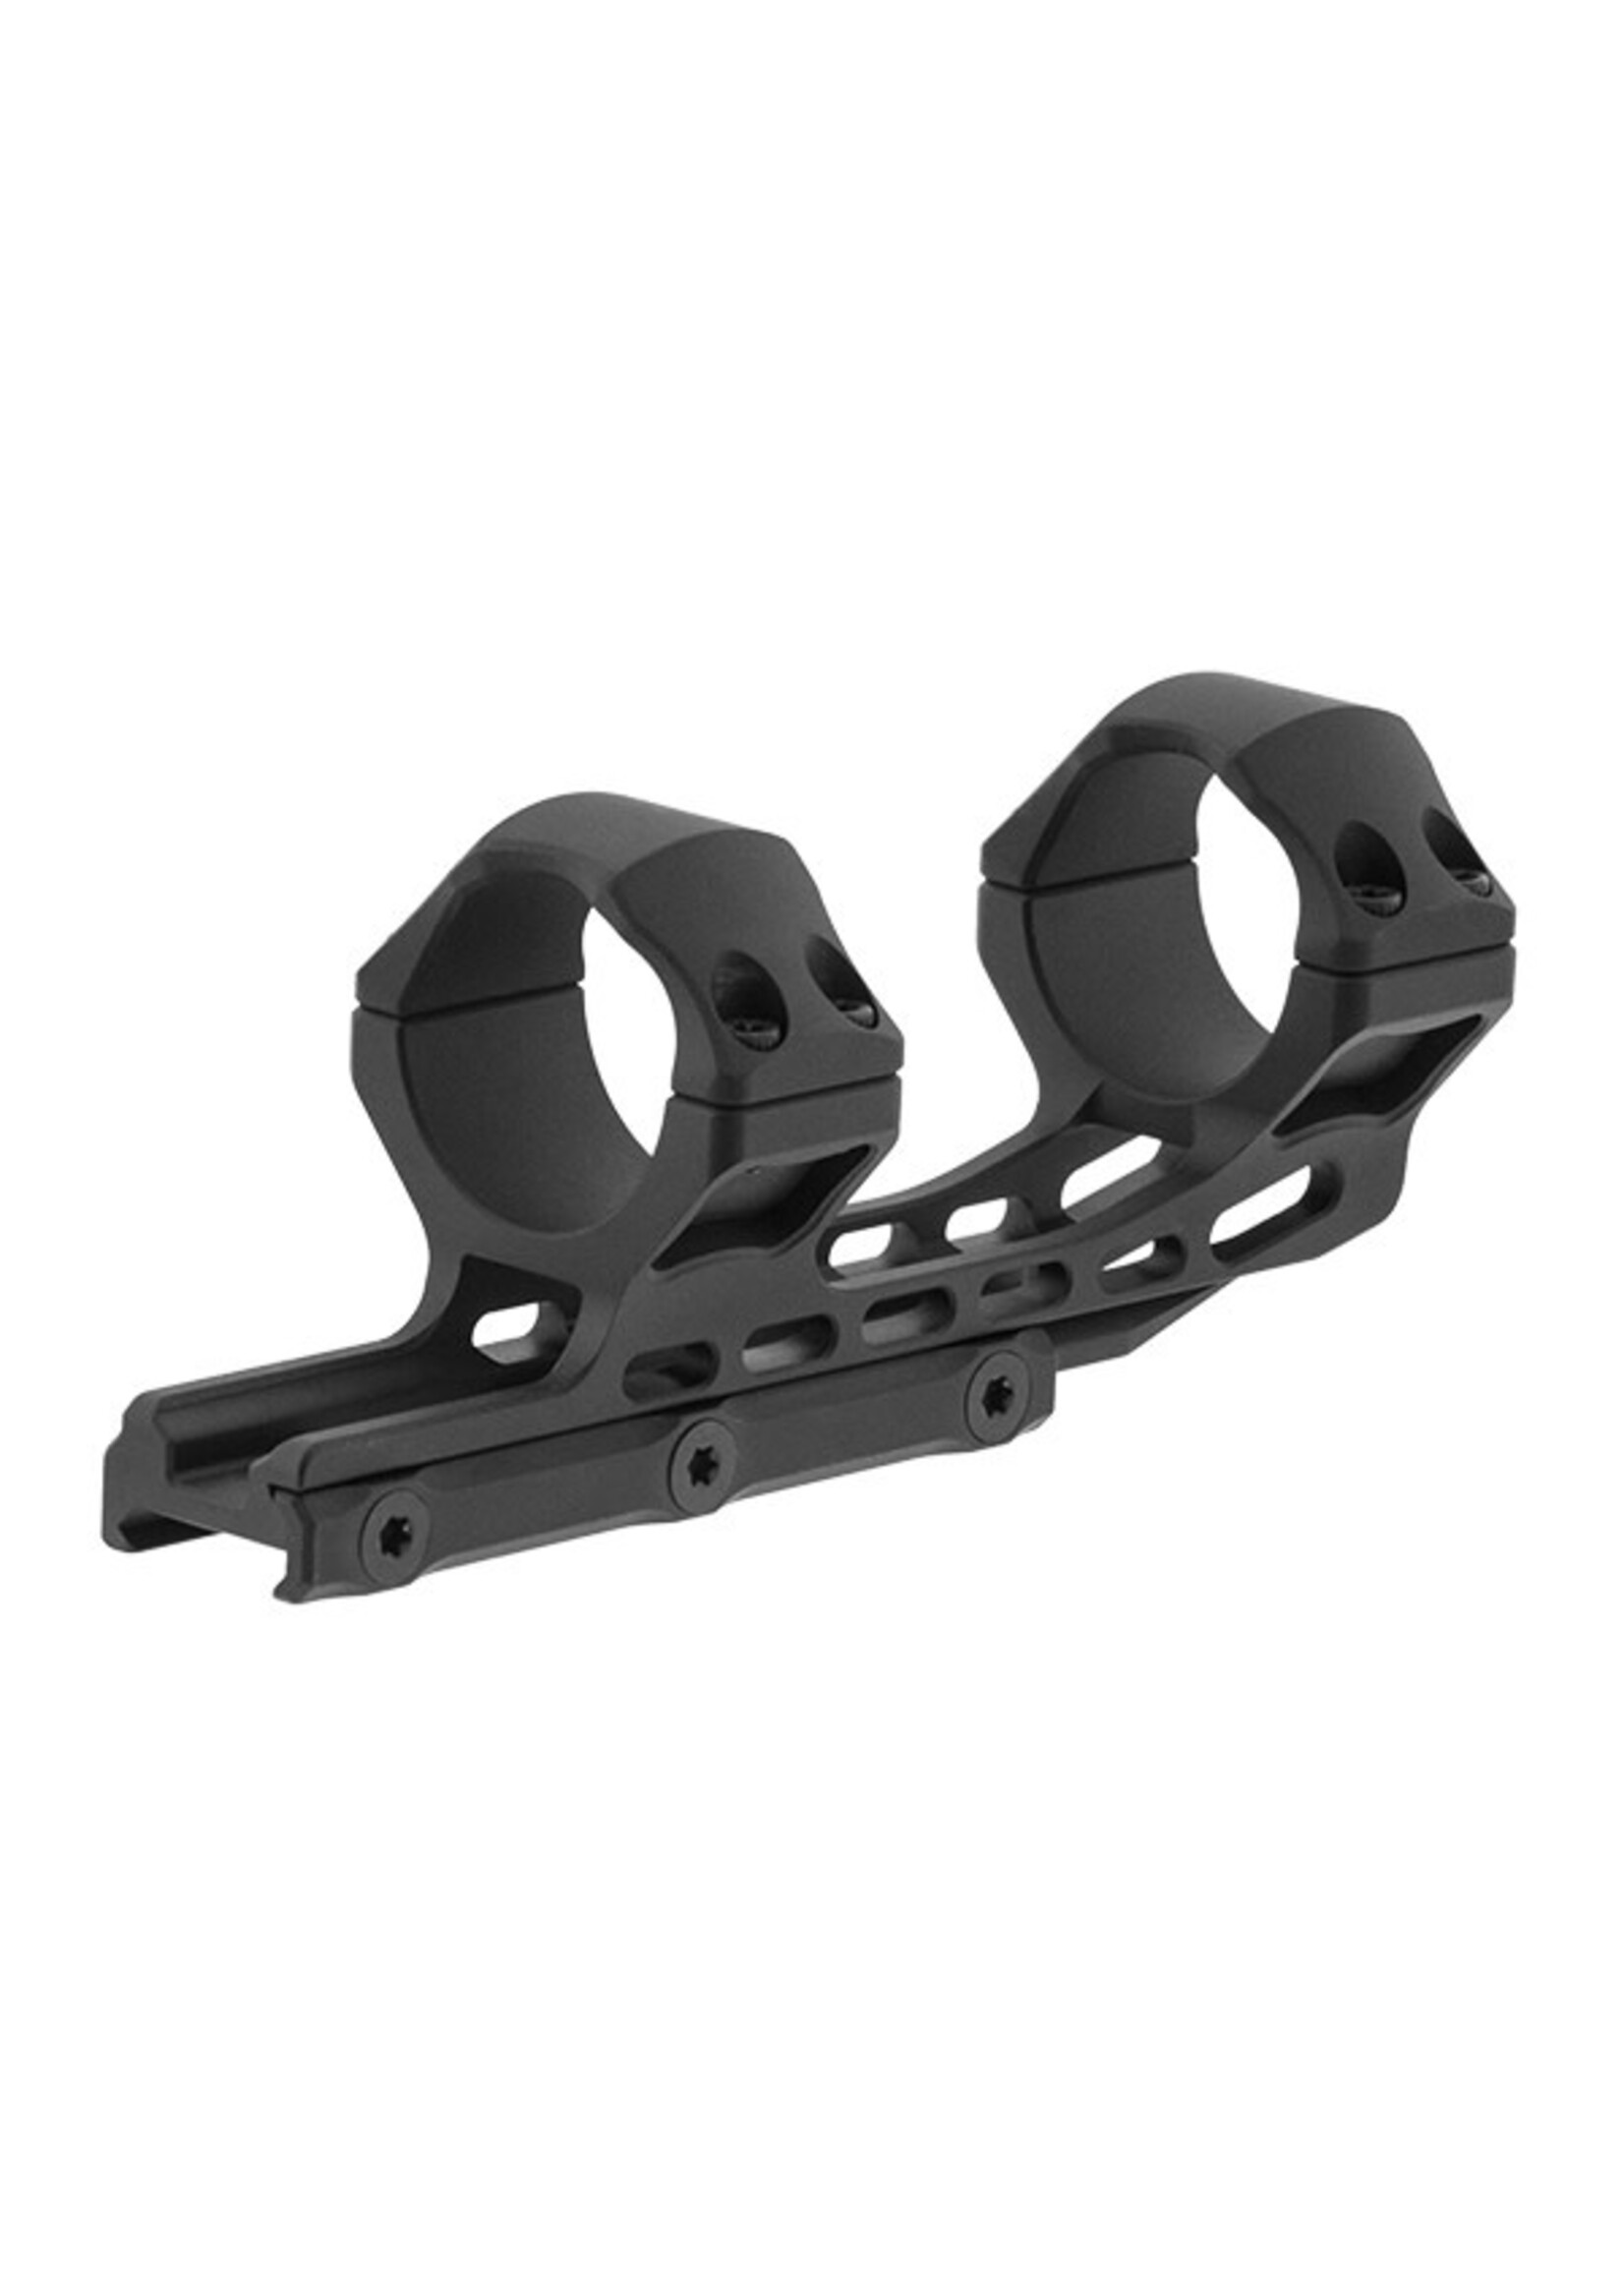 UTG ACCU-SYNC 34MM HIGH PROFILE 50MM OFFSET PICATINNY SCOPE RINGS